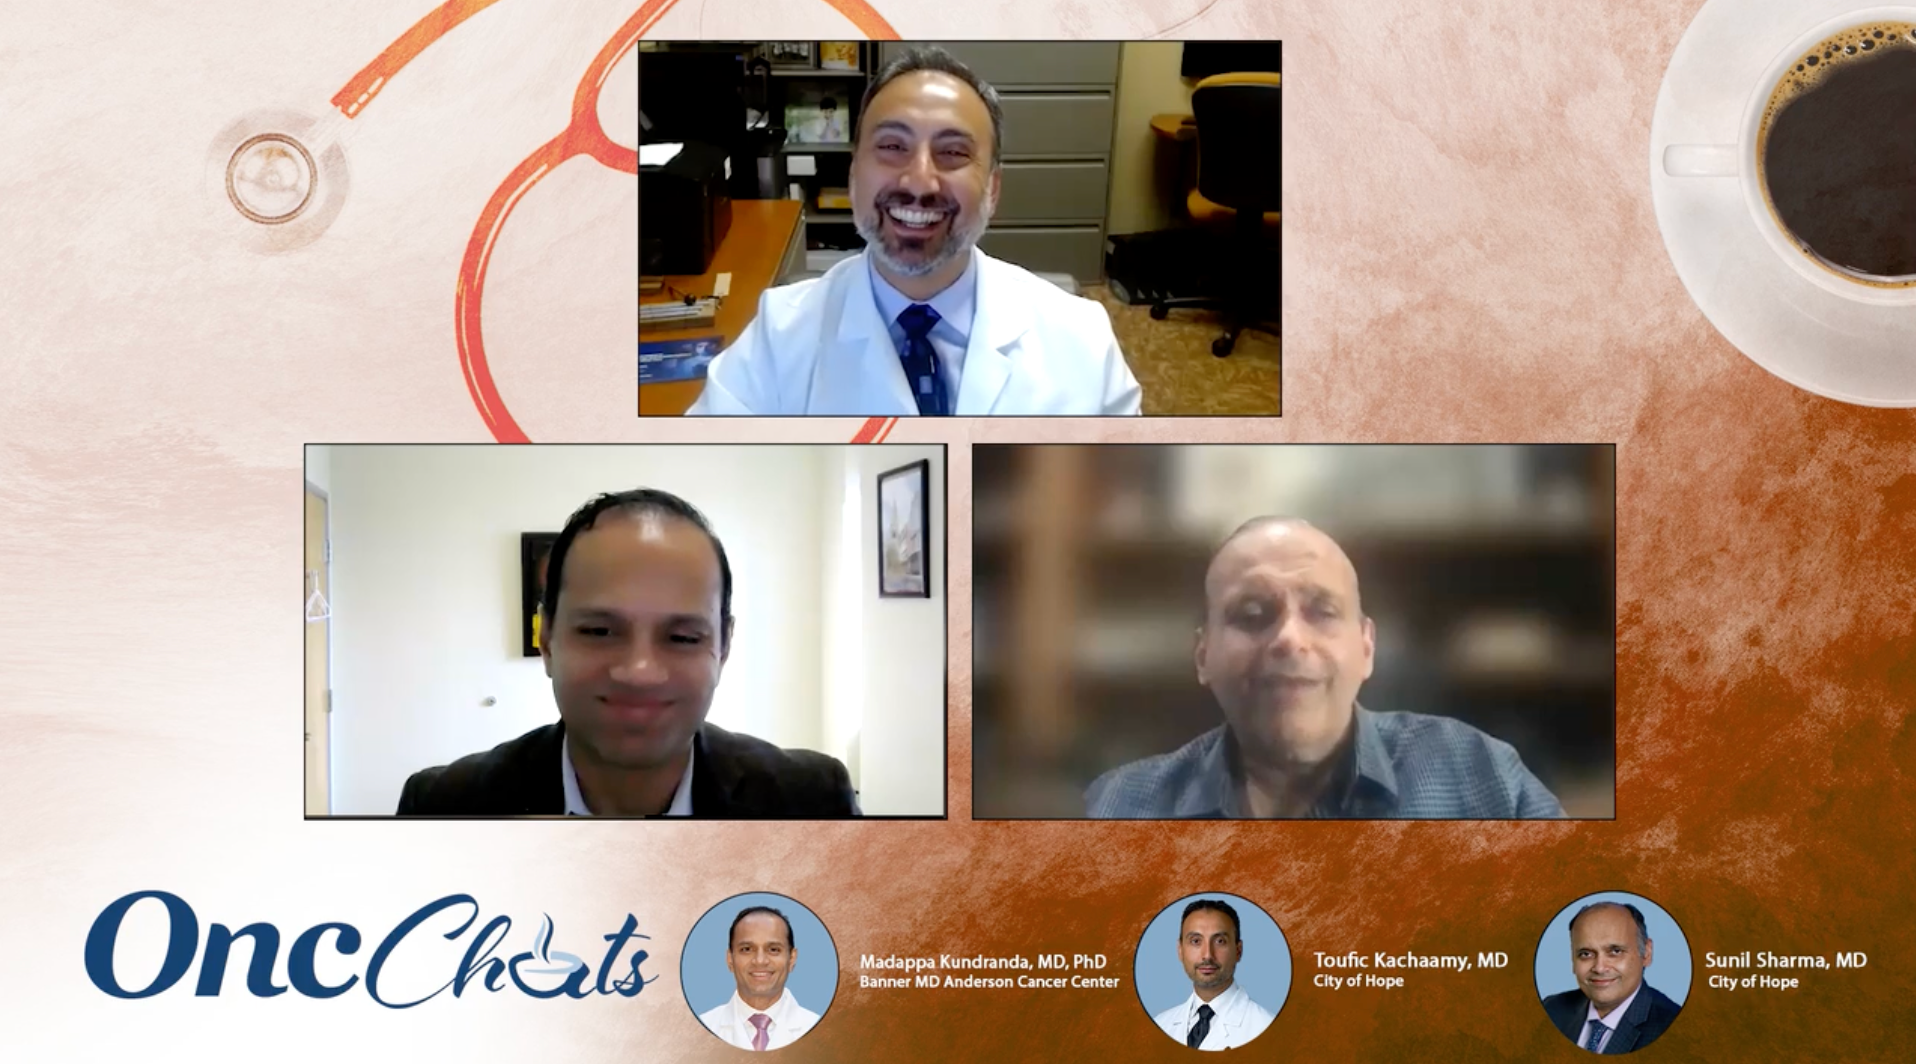 In this fifth episode of OncChats: Leveraging Immunotherapy in GI Malignancies, Toufic Kachaamy, MD, of City of Hope, Sunil Sharma, MD, of City of Hope, and Madappa Kundranda, MD, PhD, of Banner MD Anderson Cancer Center, discuss next steps for research, including vaccination strategies, personalized cellular therapies, and more.